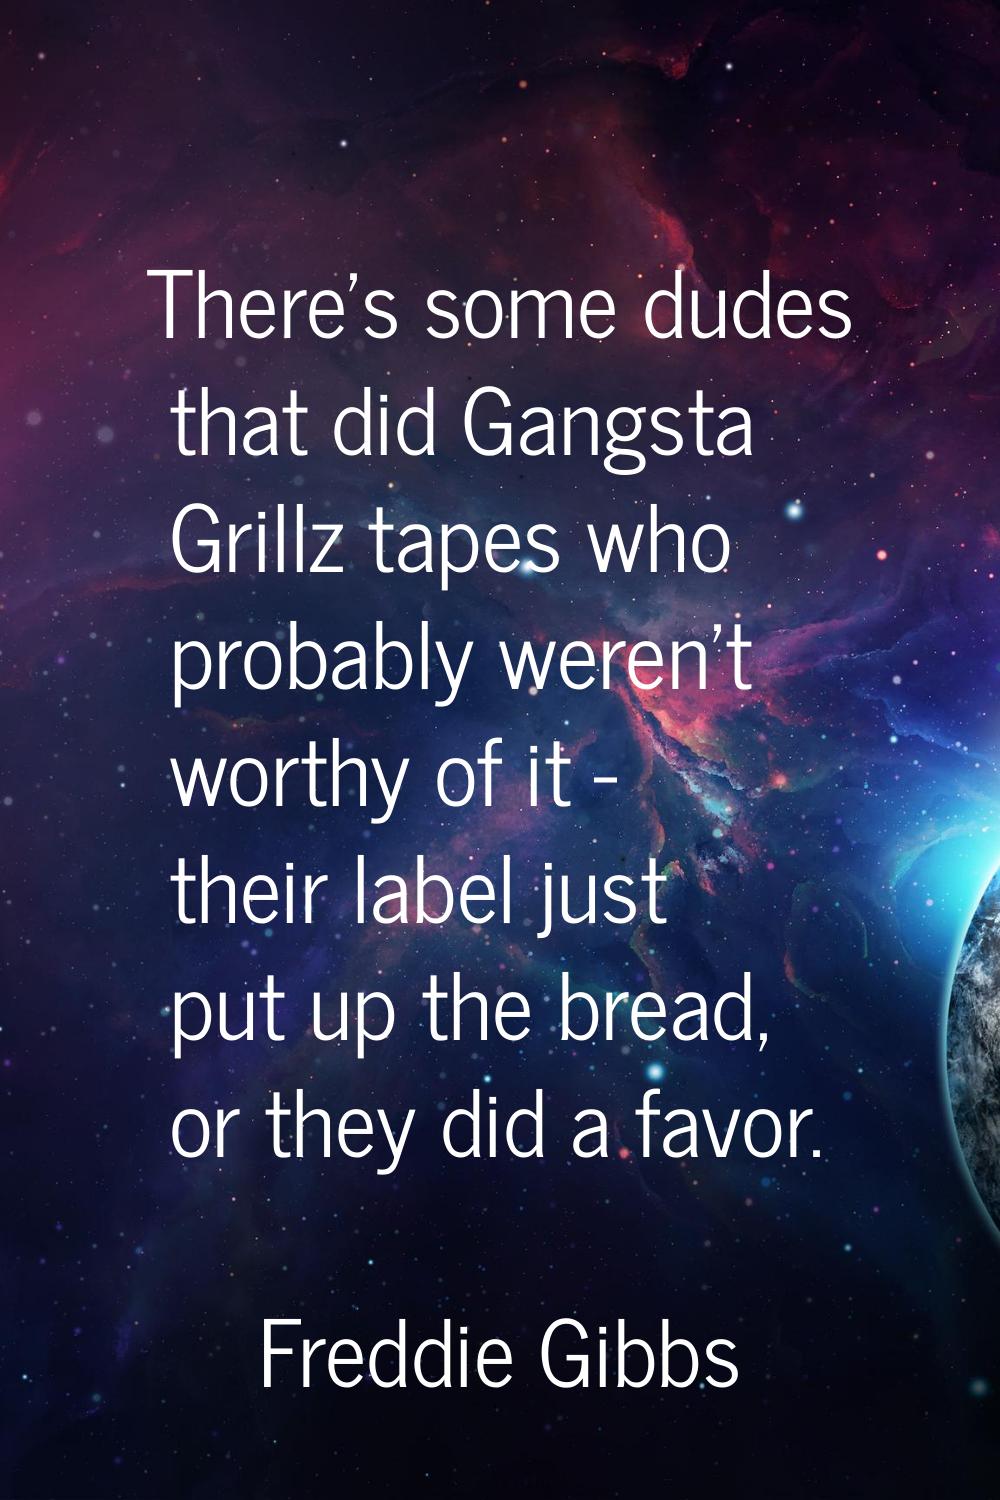 There's some dudes that did Gangsta Grillz tapes who probably weren't worthy of it - their label ju